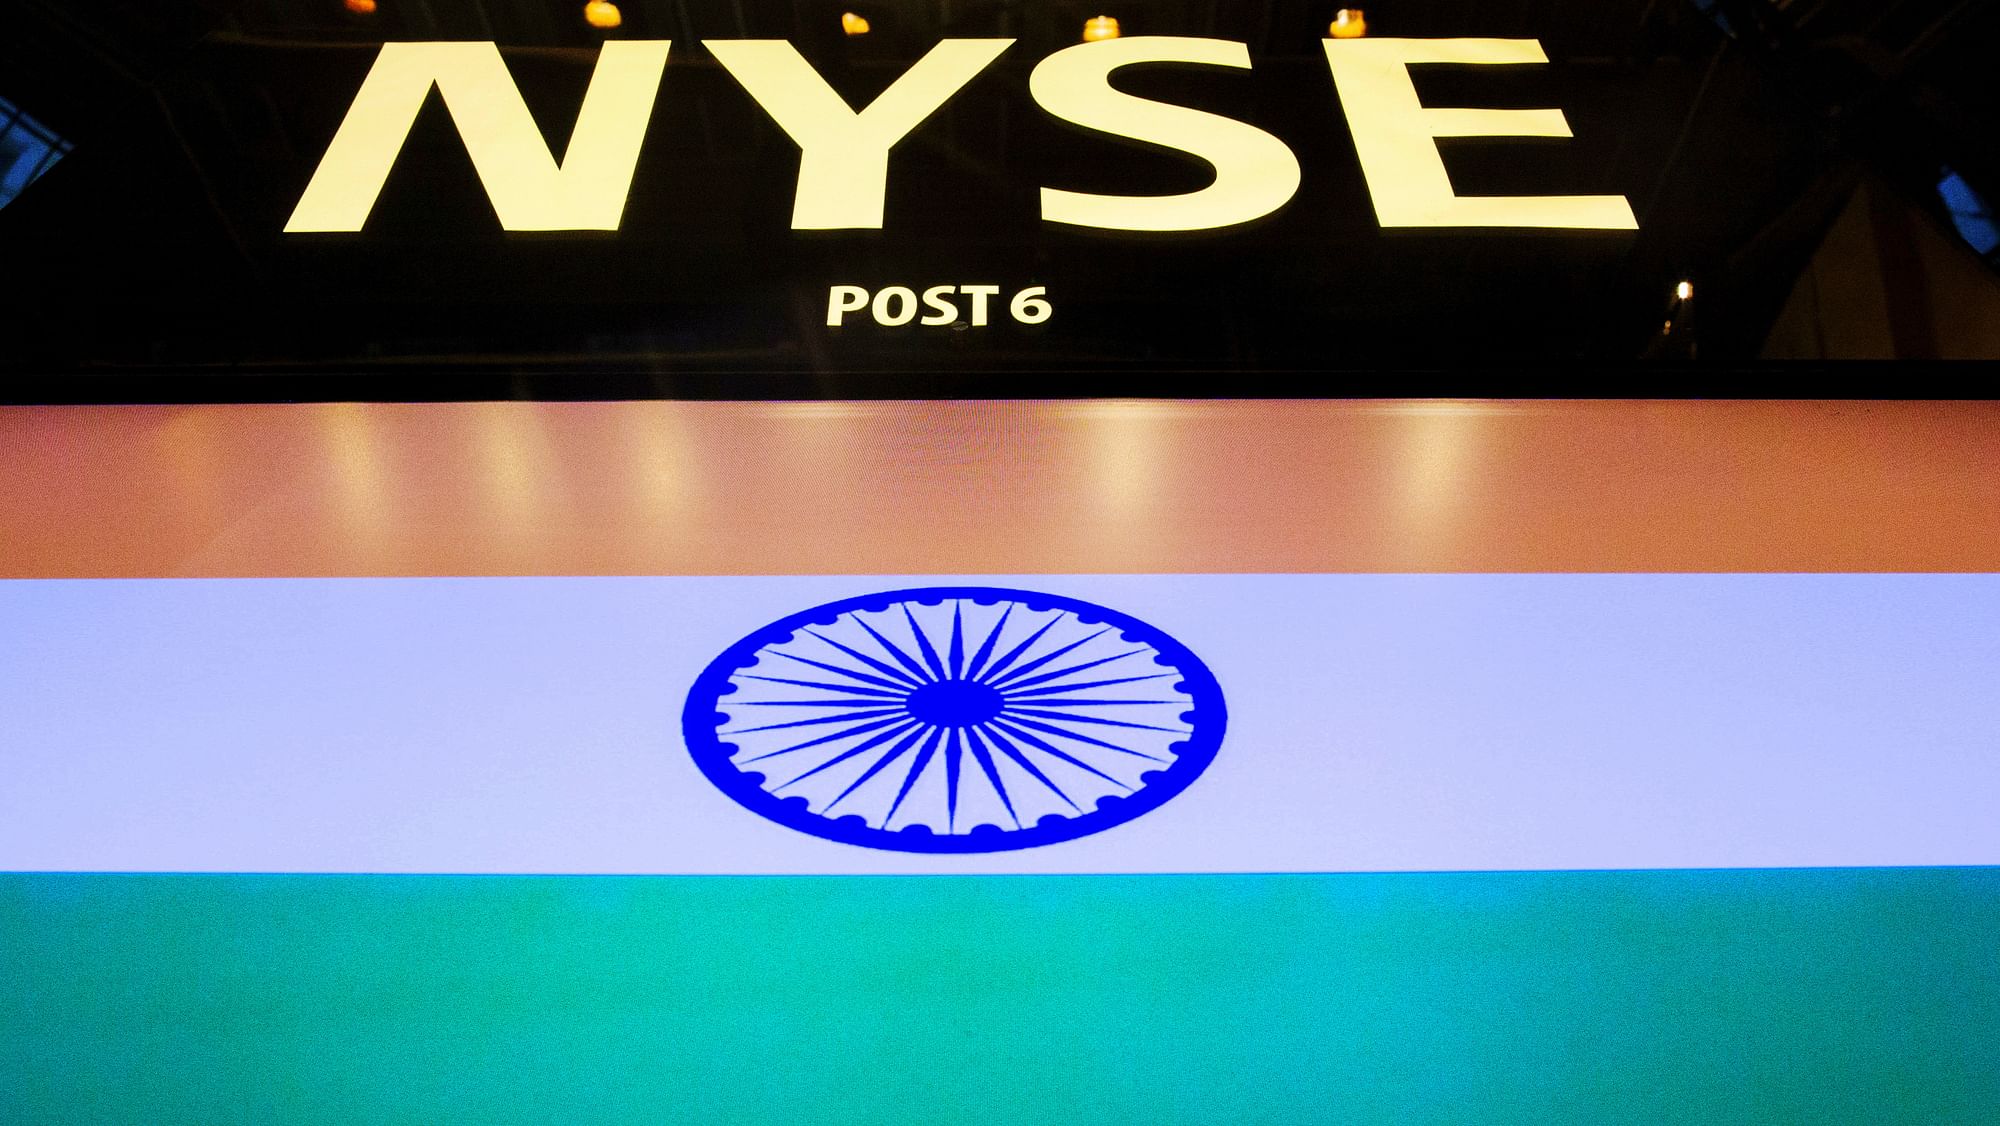 The initials of the New York Stock Exchange are seen above a display of India’s national flag on the main trading floor at the New York Stock Exchange June 17, 2015. (Photo: Reuters)